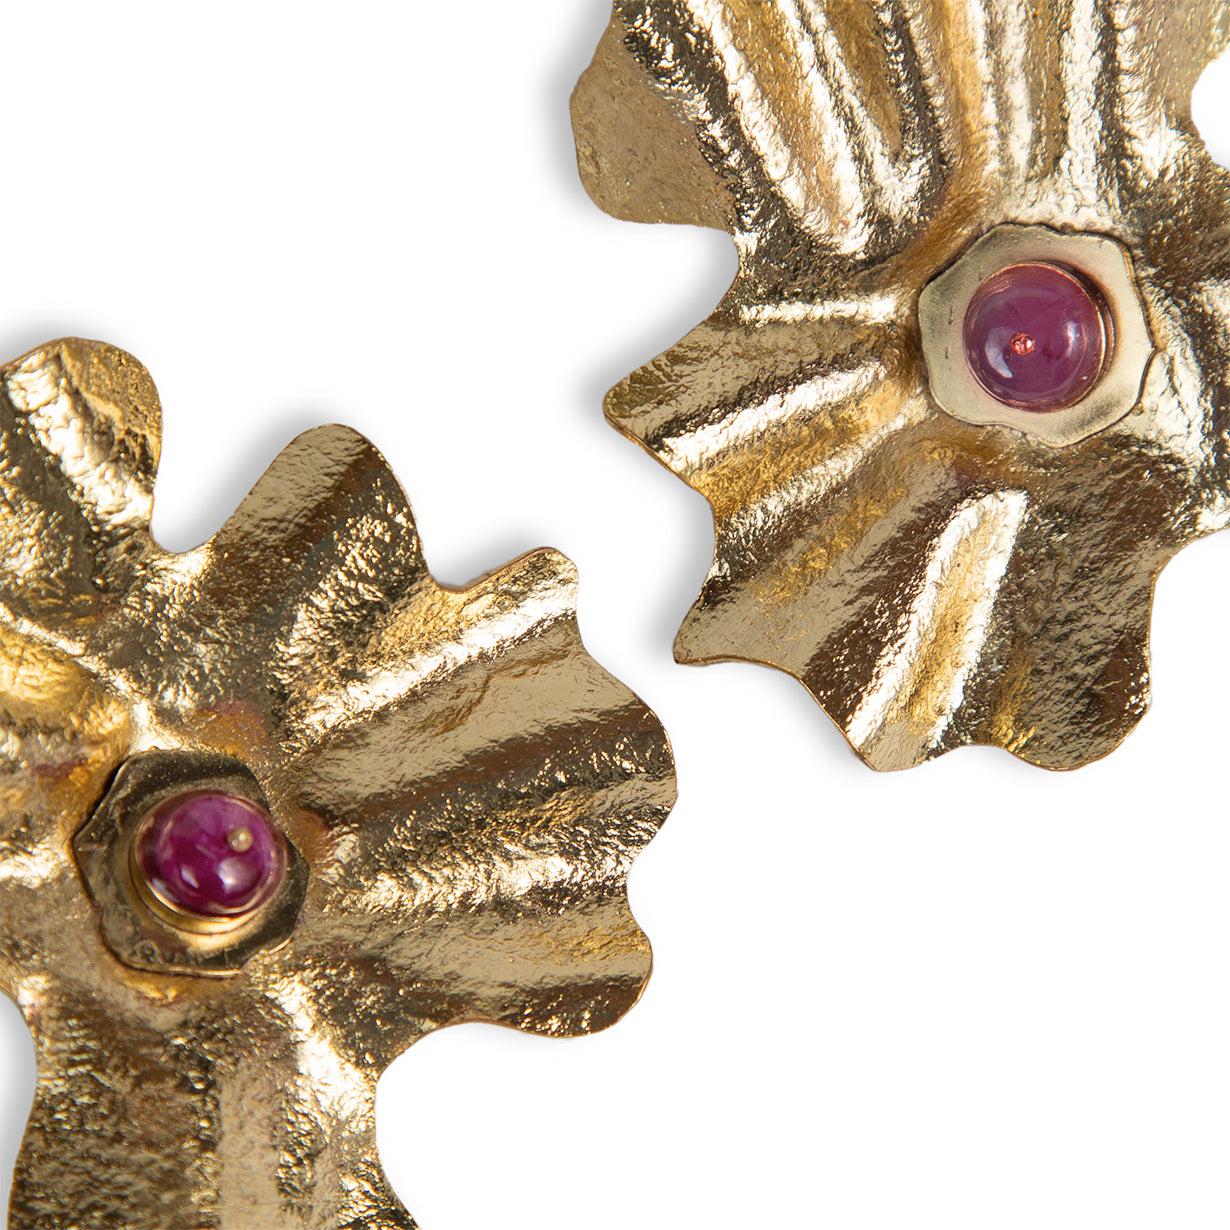 Coral Discosoma Earring - Large